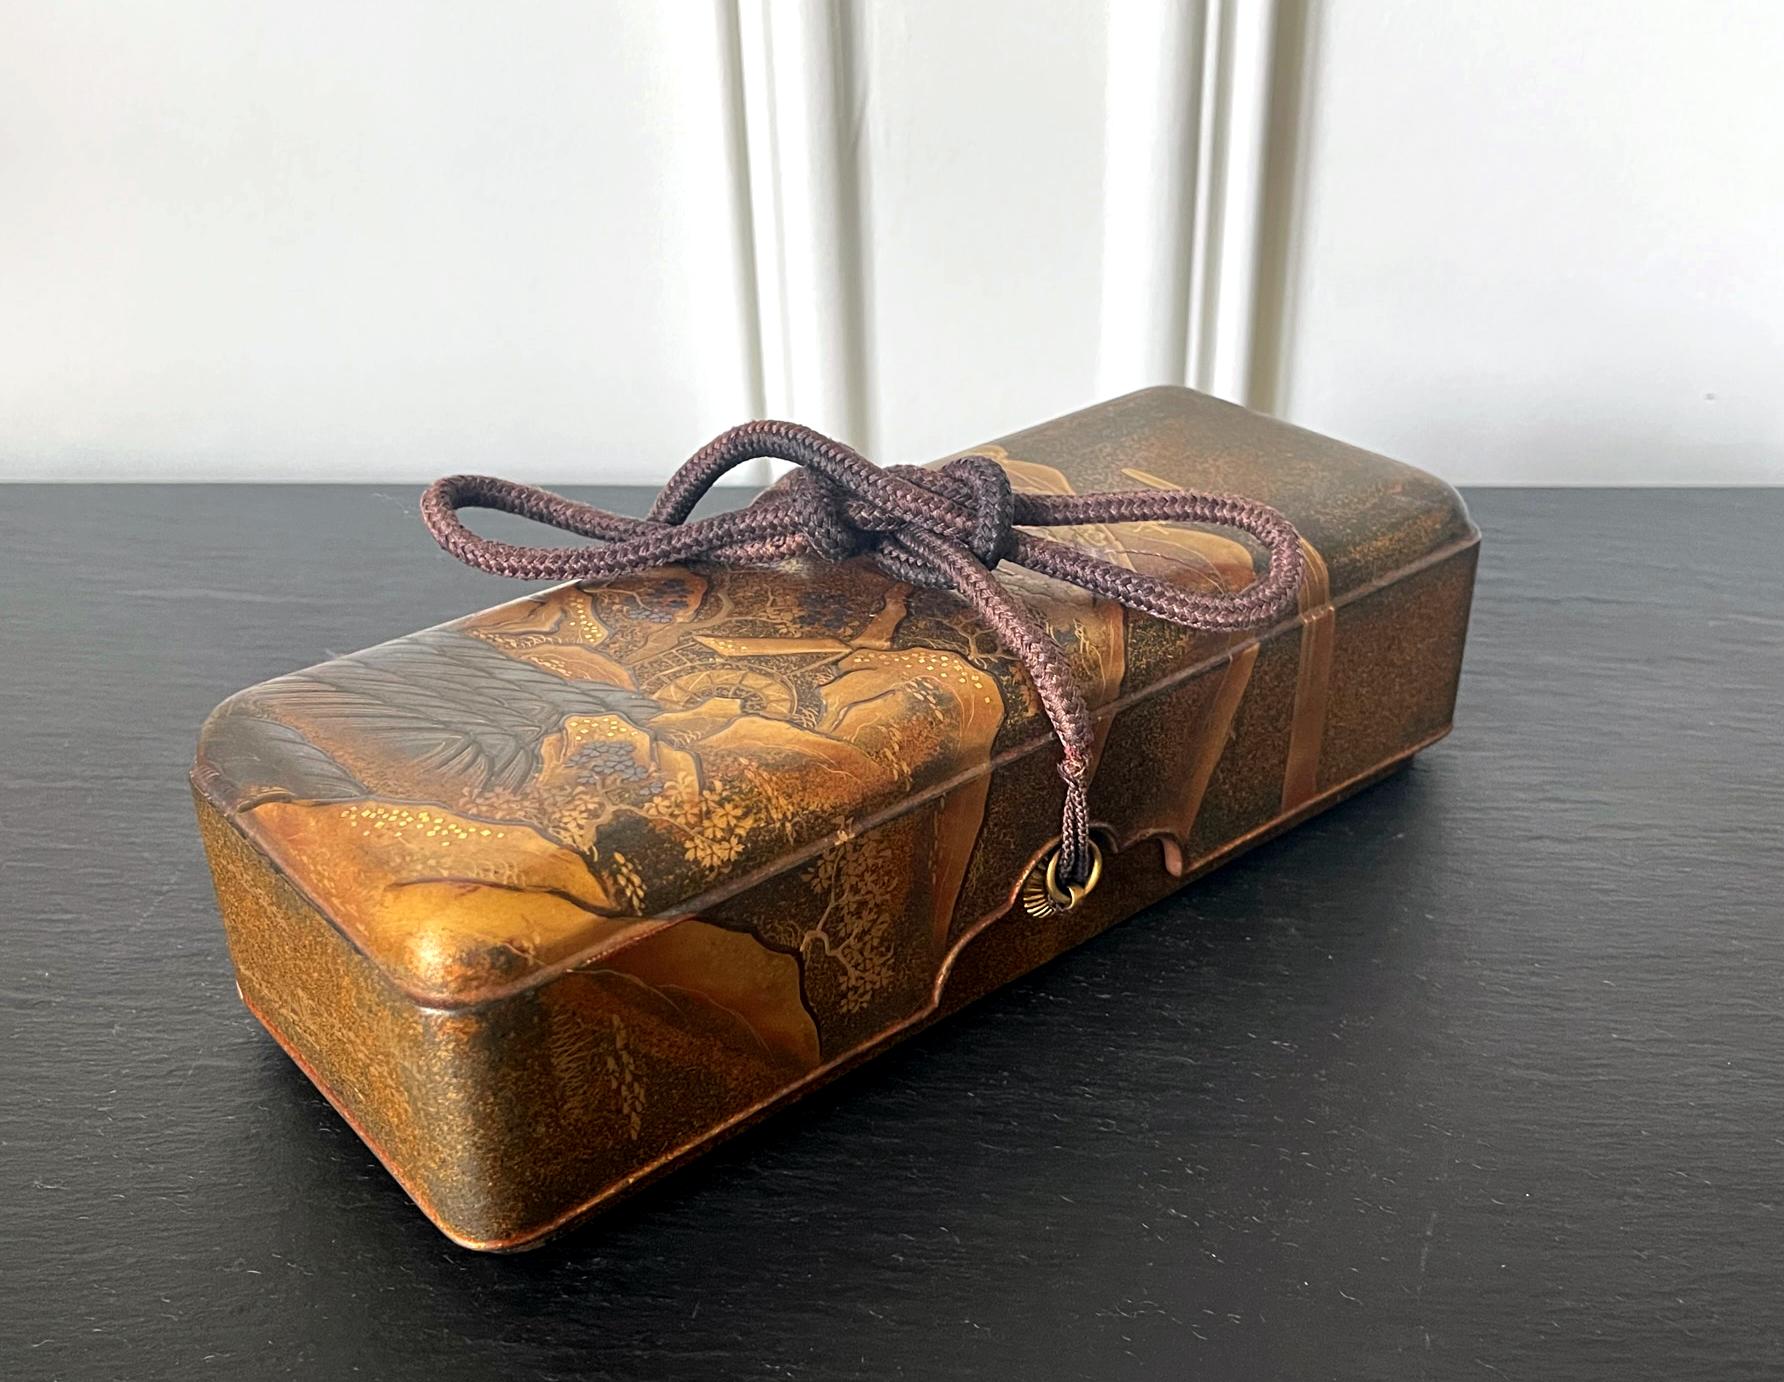 A Japanese lacquered wood fubako (a box used to store document or small scroll painting), circa second half of 19th century late Edo period. The rectangular box features an unusually deep lipped lid with slightly rounded corners, a conforming lower